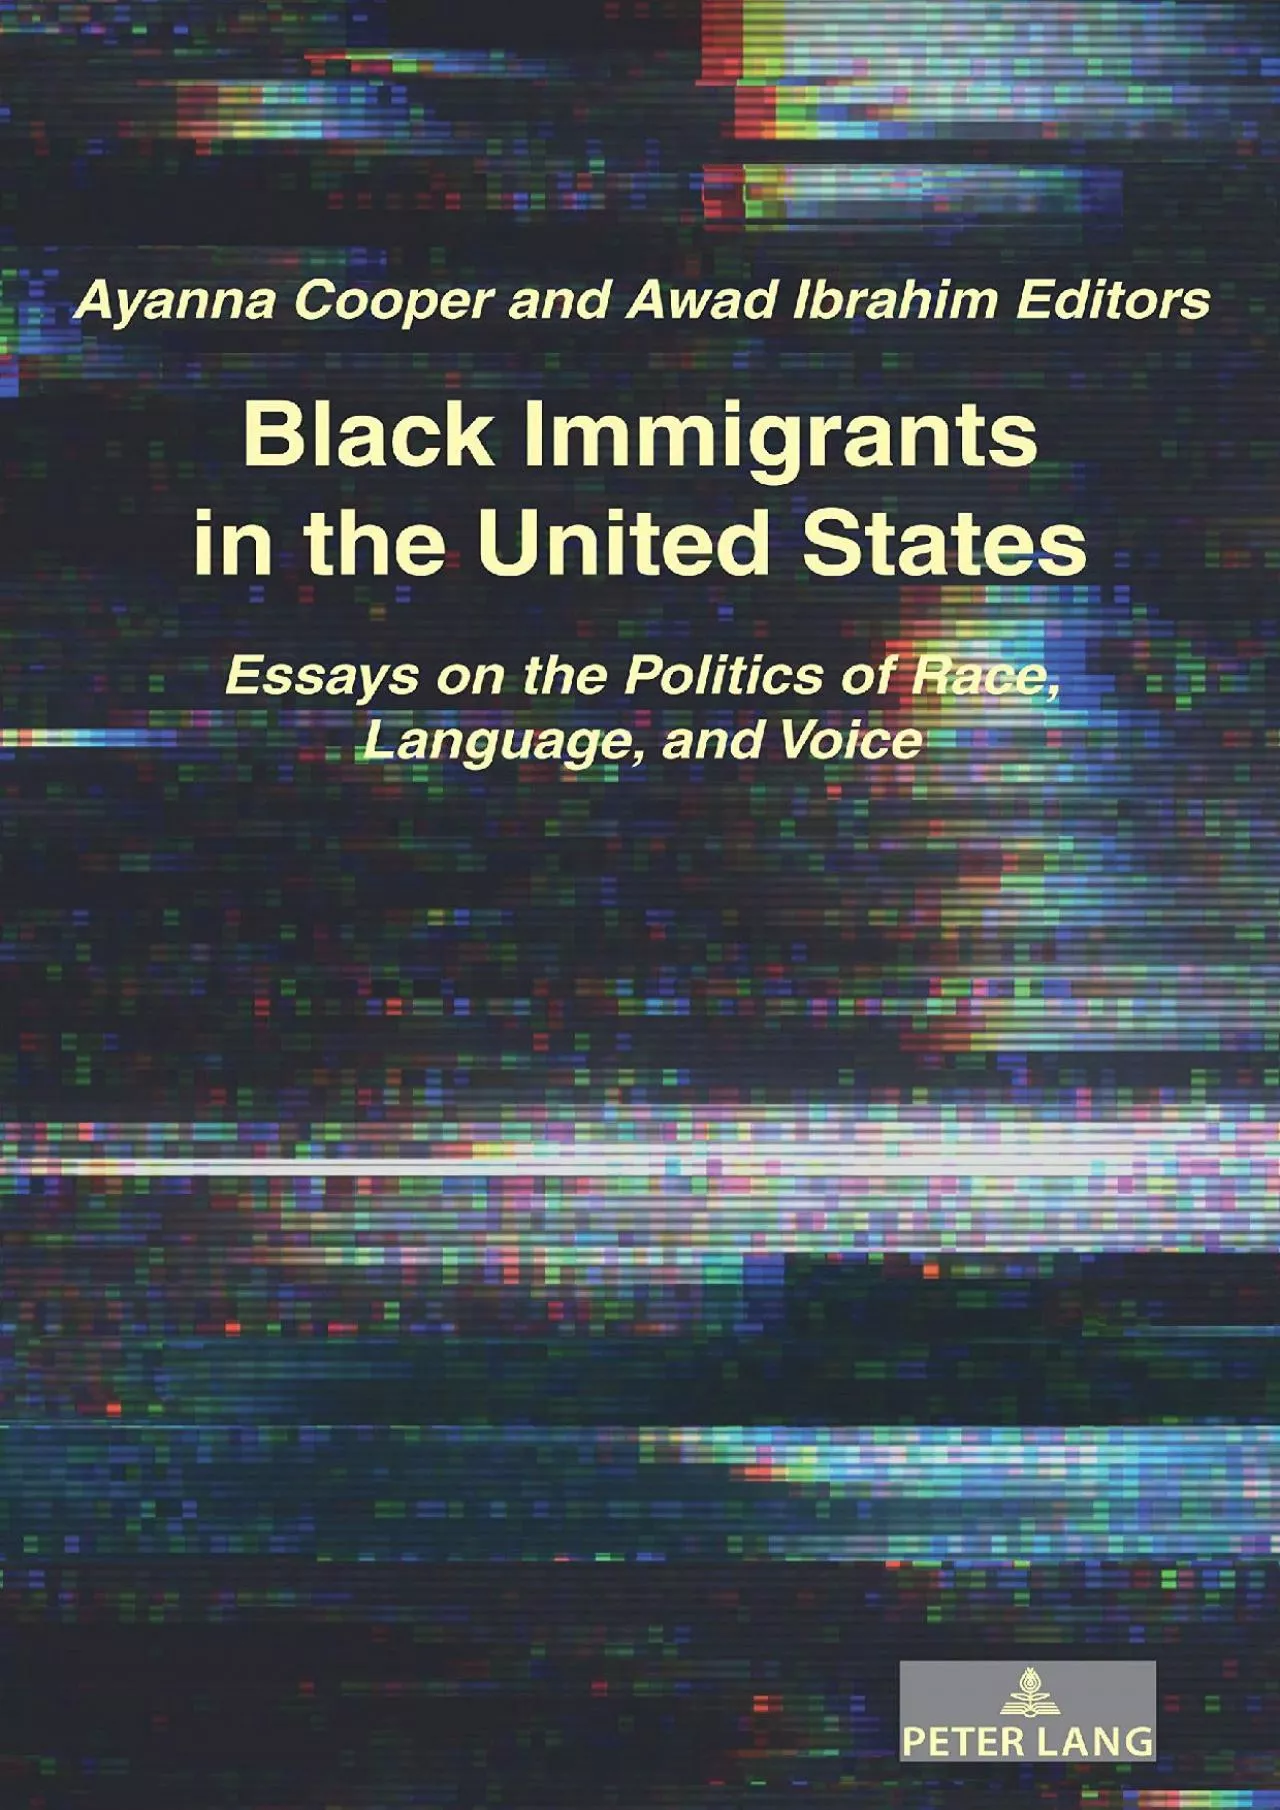 (BOOK)-Black Immigrants in the United States: Essays on the Politics of Race, Language,